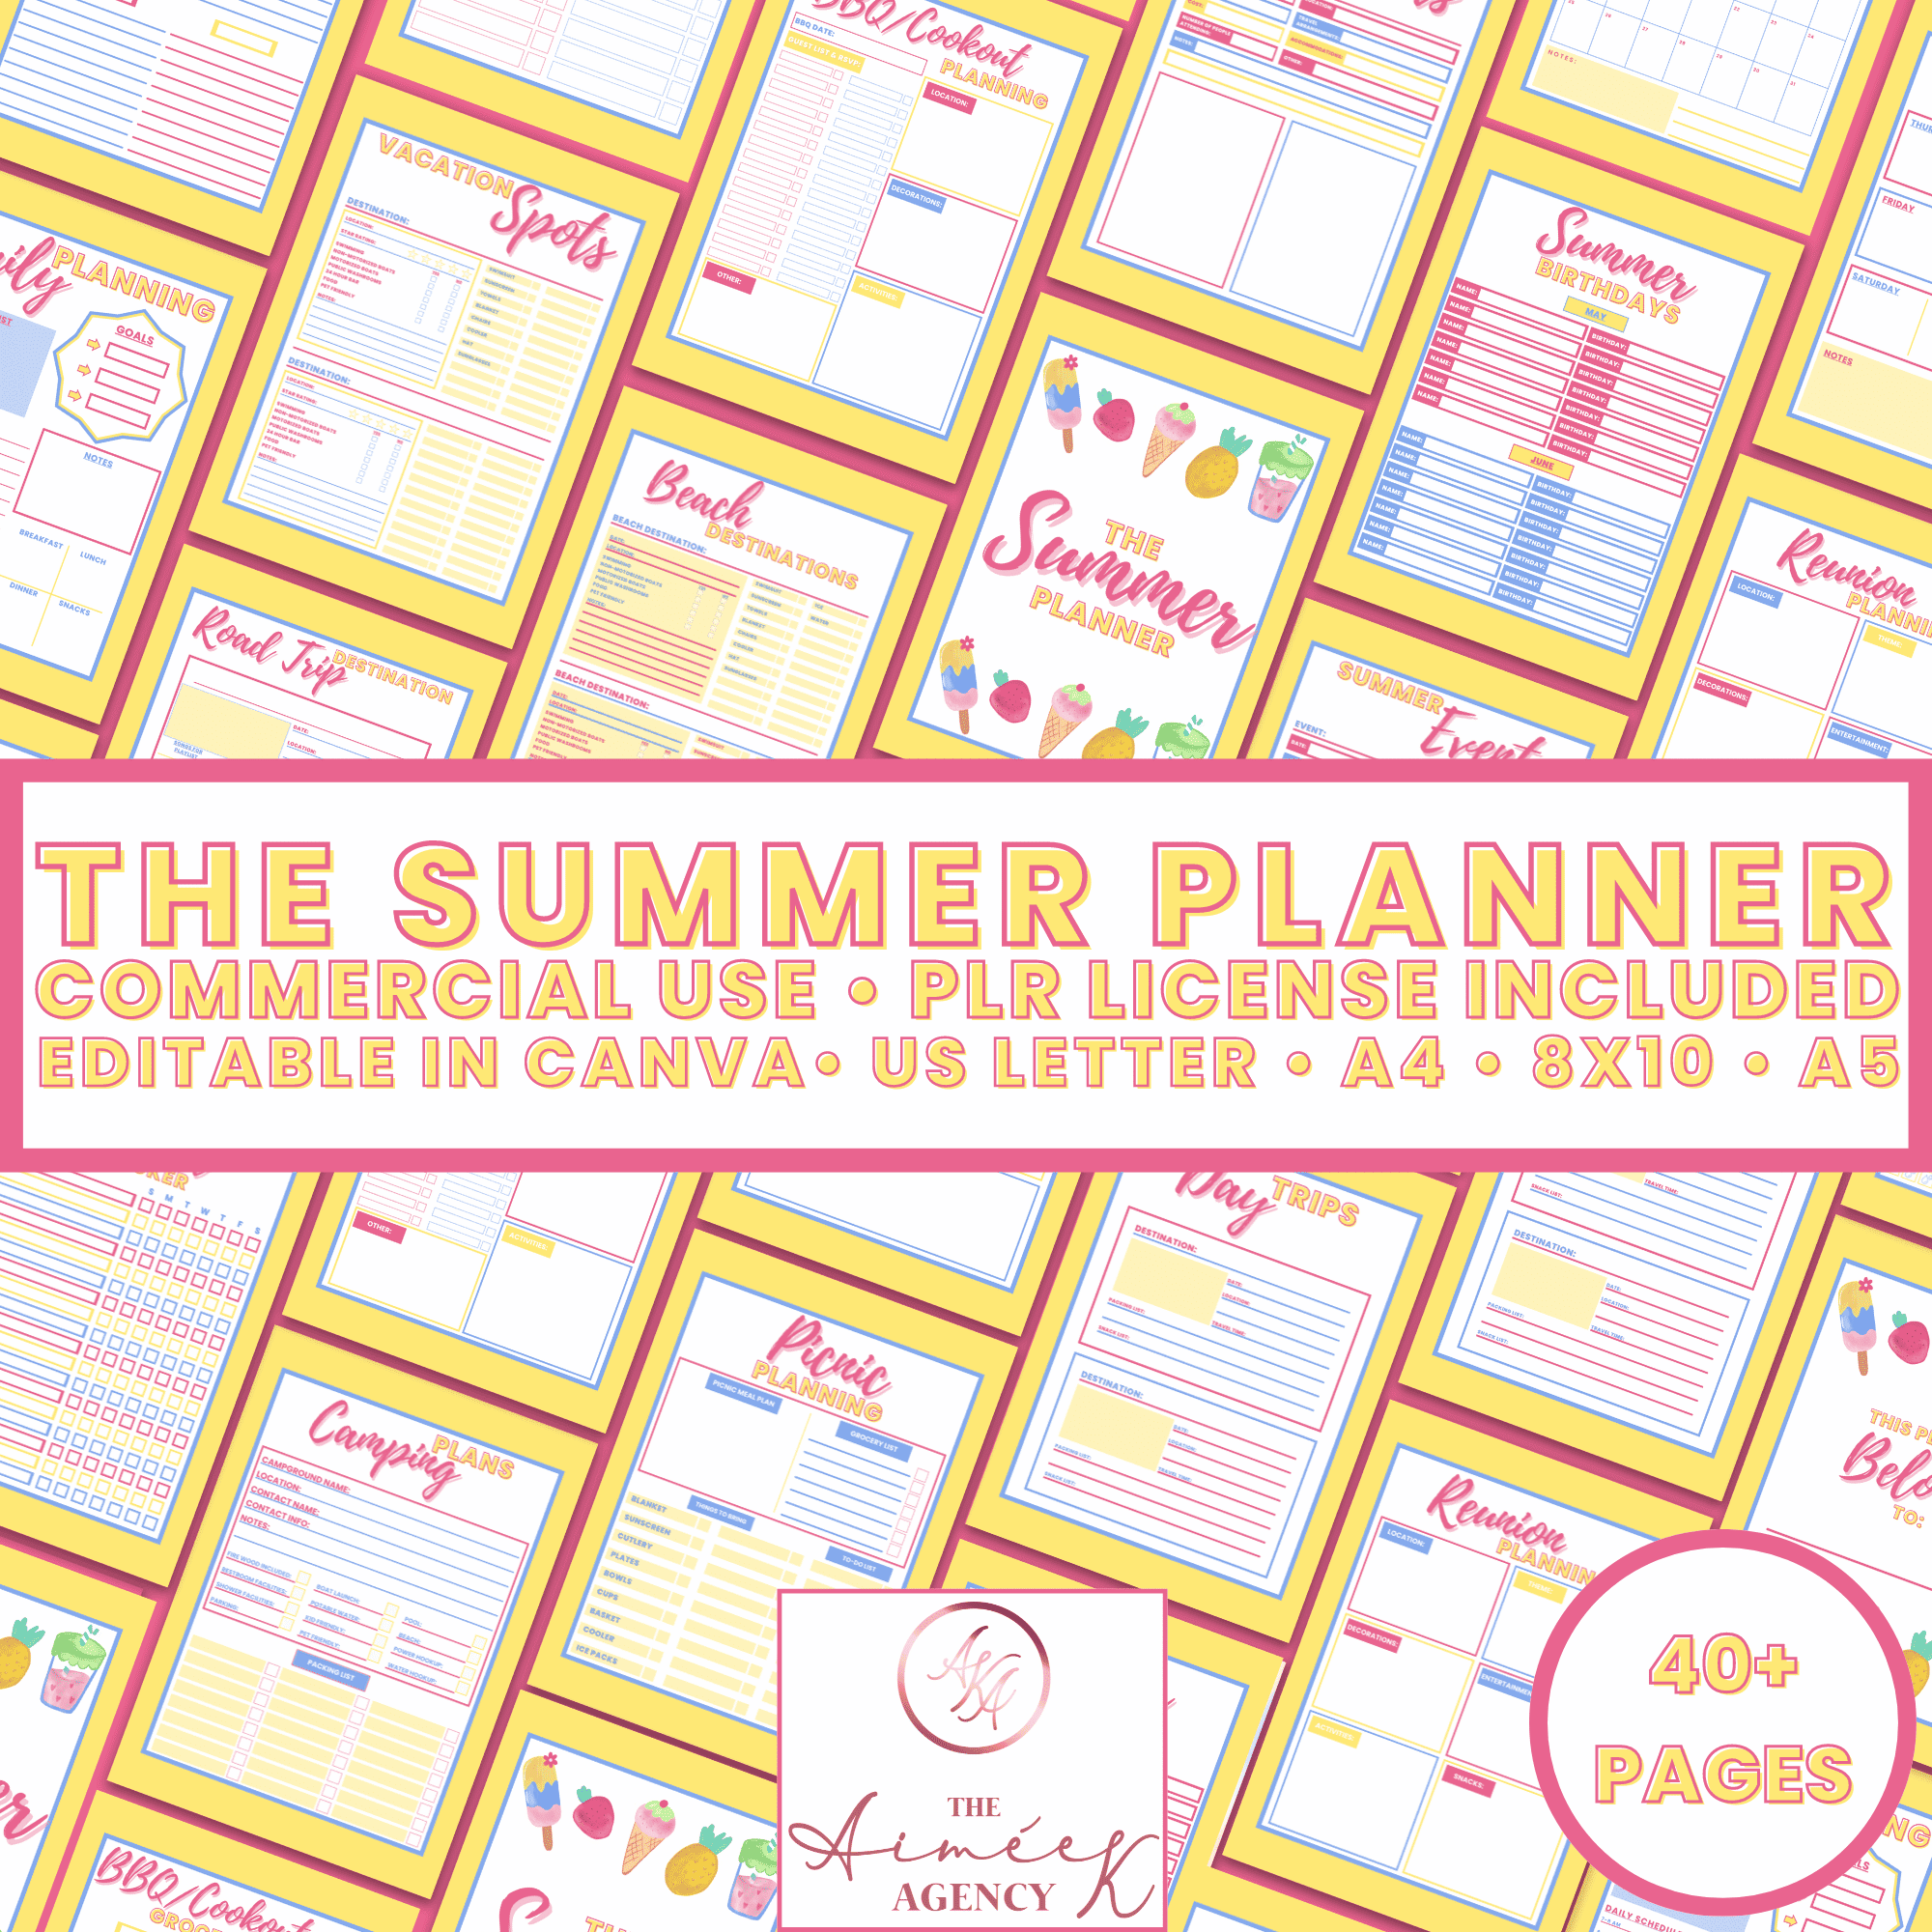 A promotional image for "The Summer Planner" showing various planner pages with text stating commercial use, PLR license included, editable in Canva, available in US Letter, A4, 8x10, and A5 sizes.